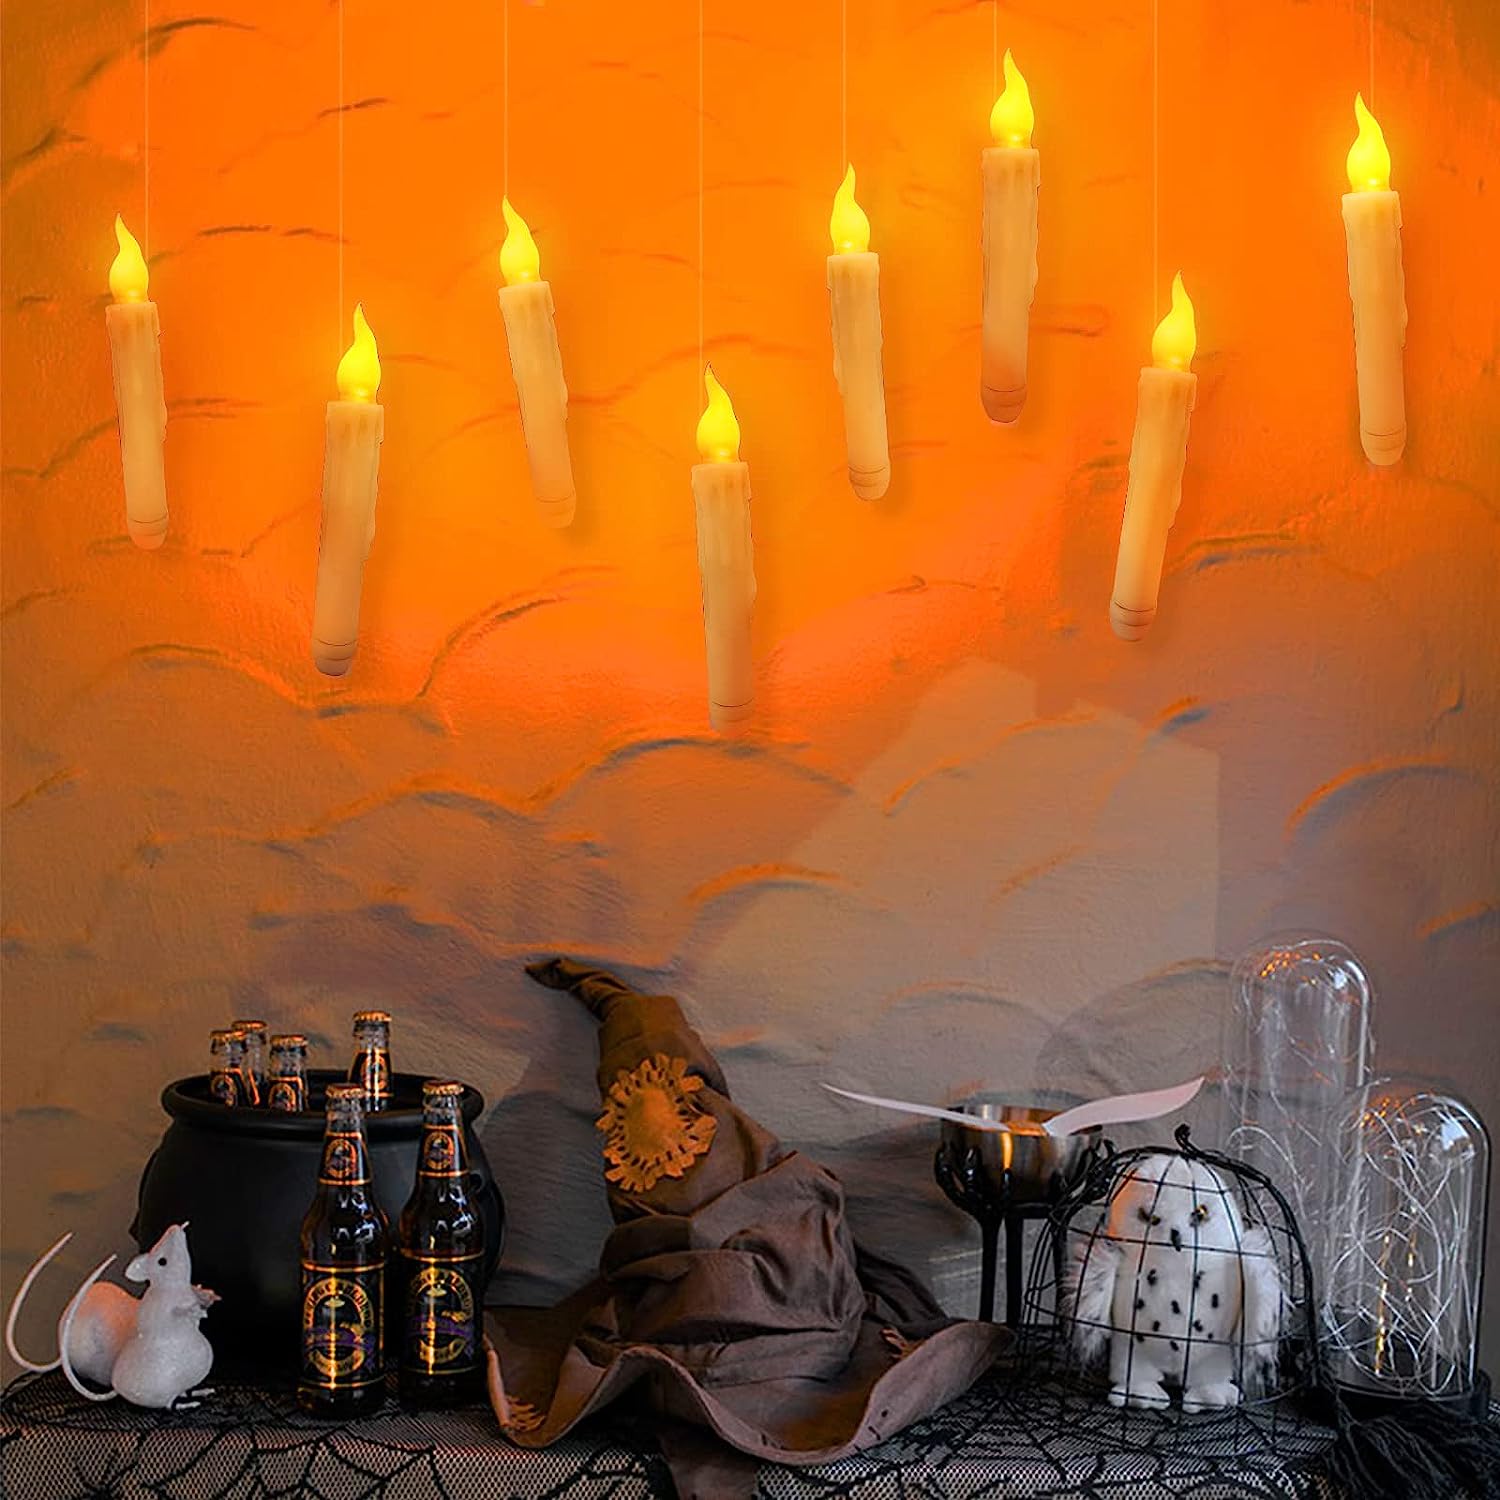 Harry Potter Floating Candles – Potter Premium Store